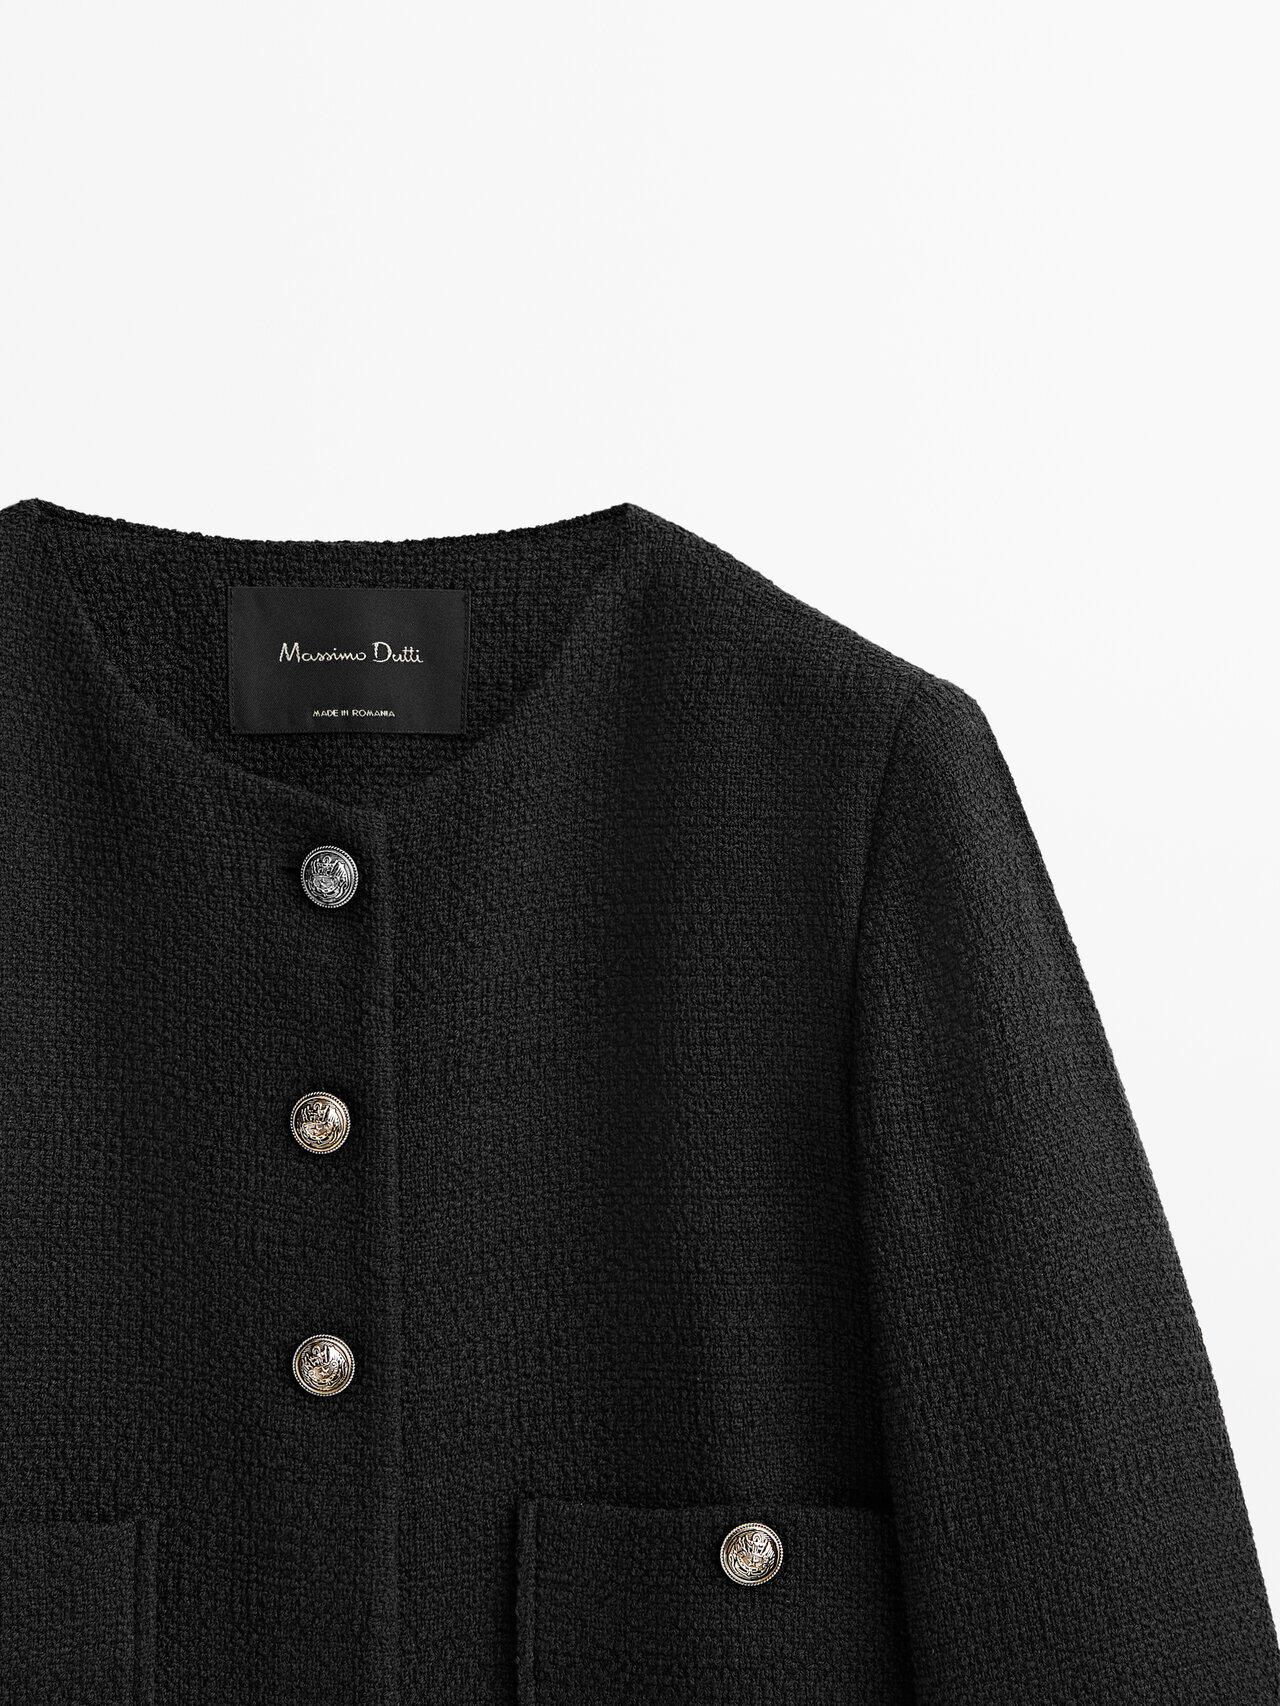 MASSIMO DUTTI Cropped Jacket With Contrast Buttons in Black | Lyst